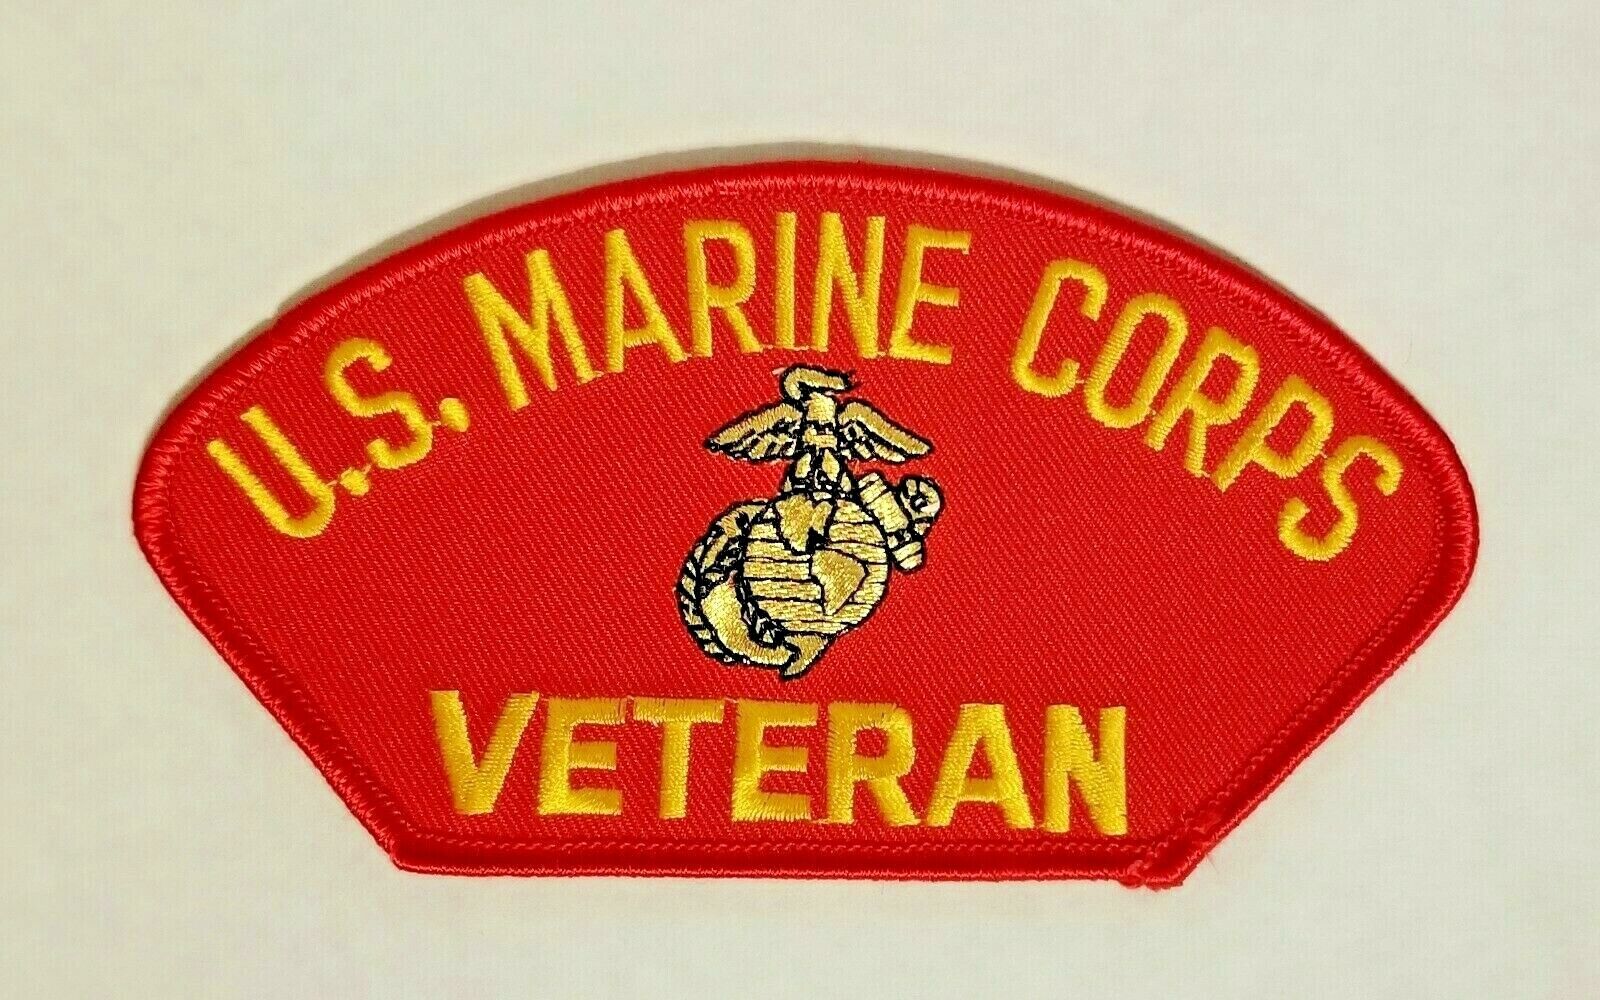 US MARINE CORPS VETERAN PATCH - MADE IN THE USA